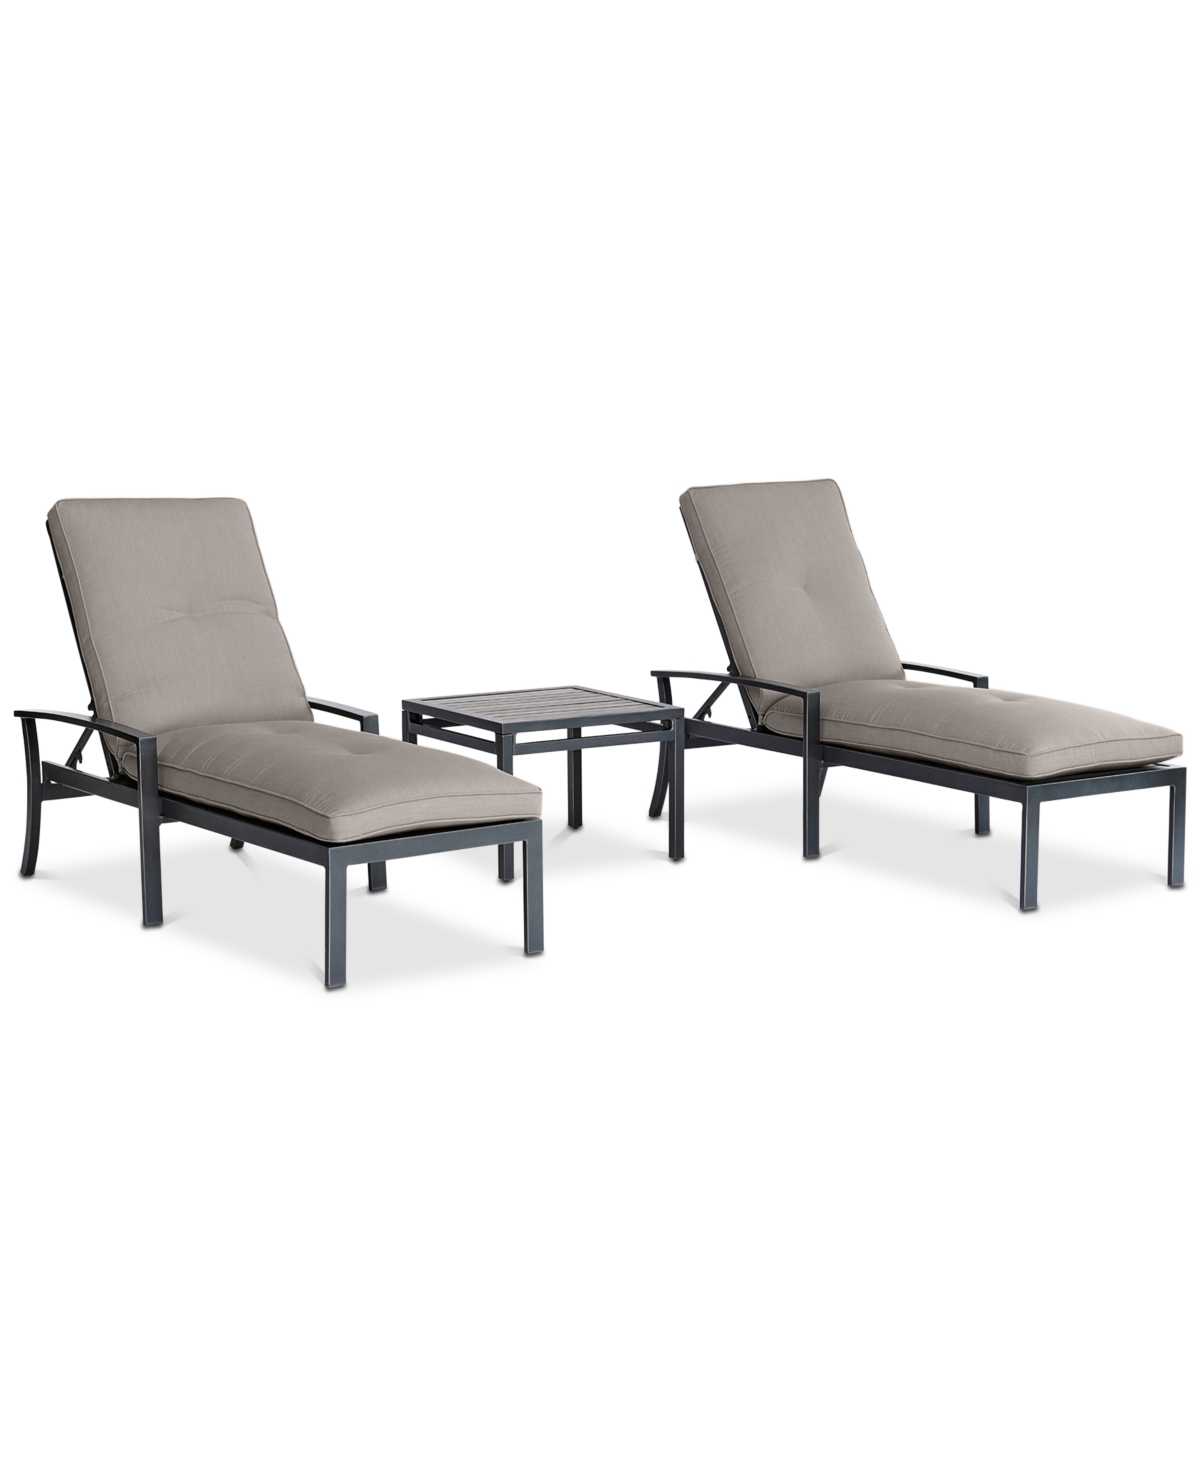 Agio Closeout! Marlough Ii Outdoor Aluminum 3-pc. Chaise Set (2 Chaise Lounges And 1 End Table), Created In Outdura Storm Smoke